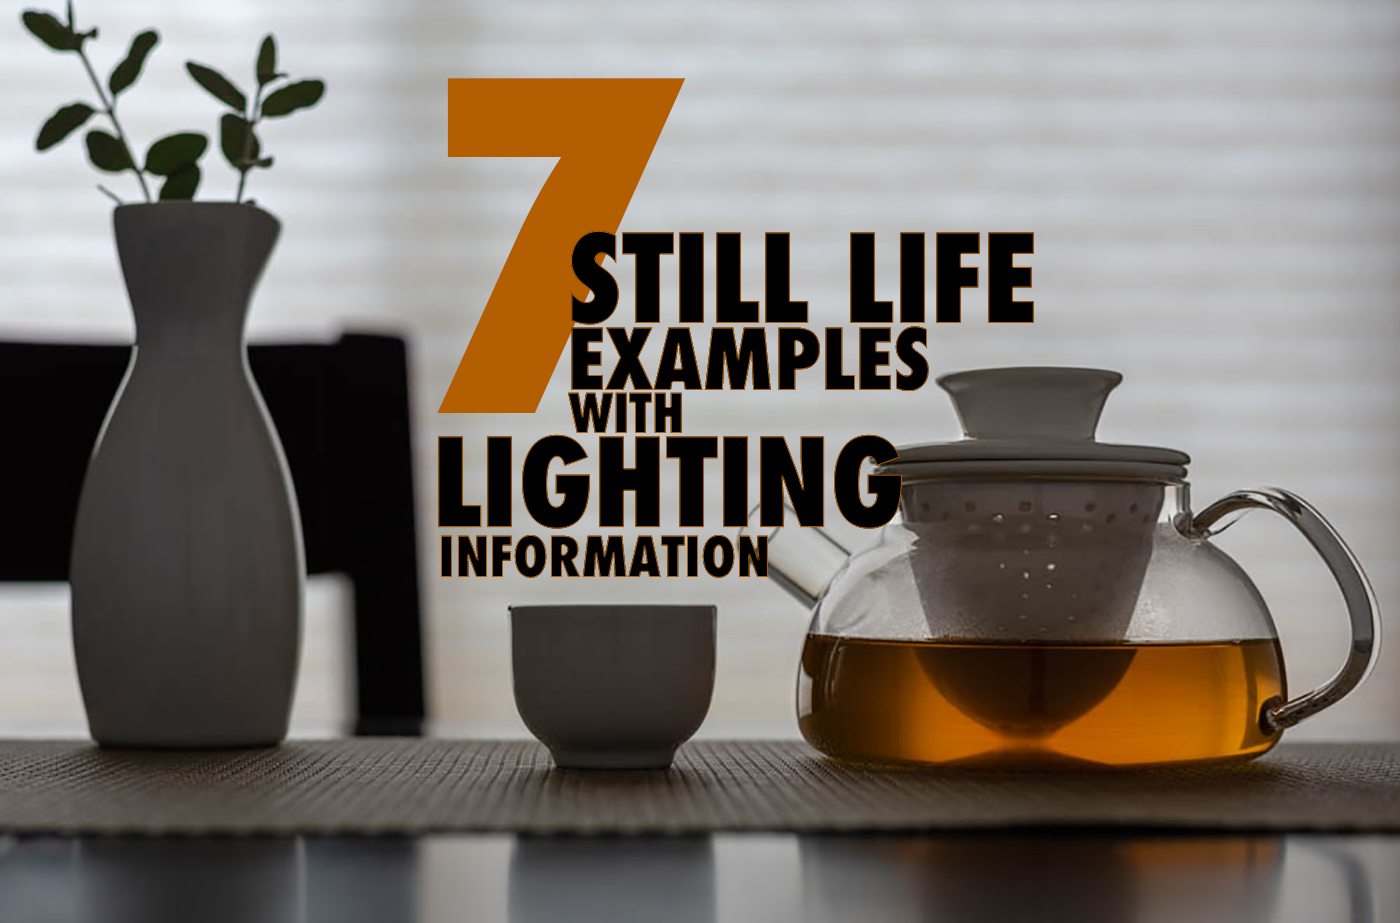 7 STILL LIFE IMAGES DECONSTRUCTED (WITH LIGHTING)